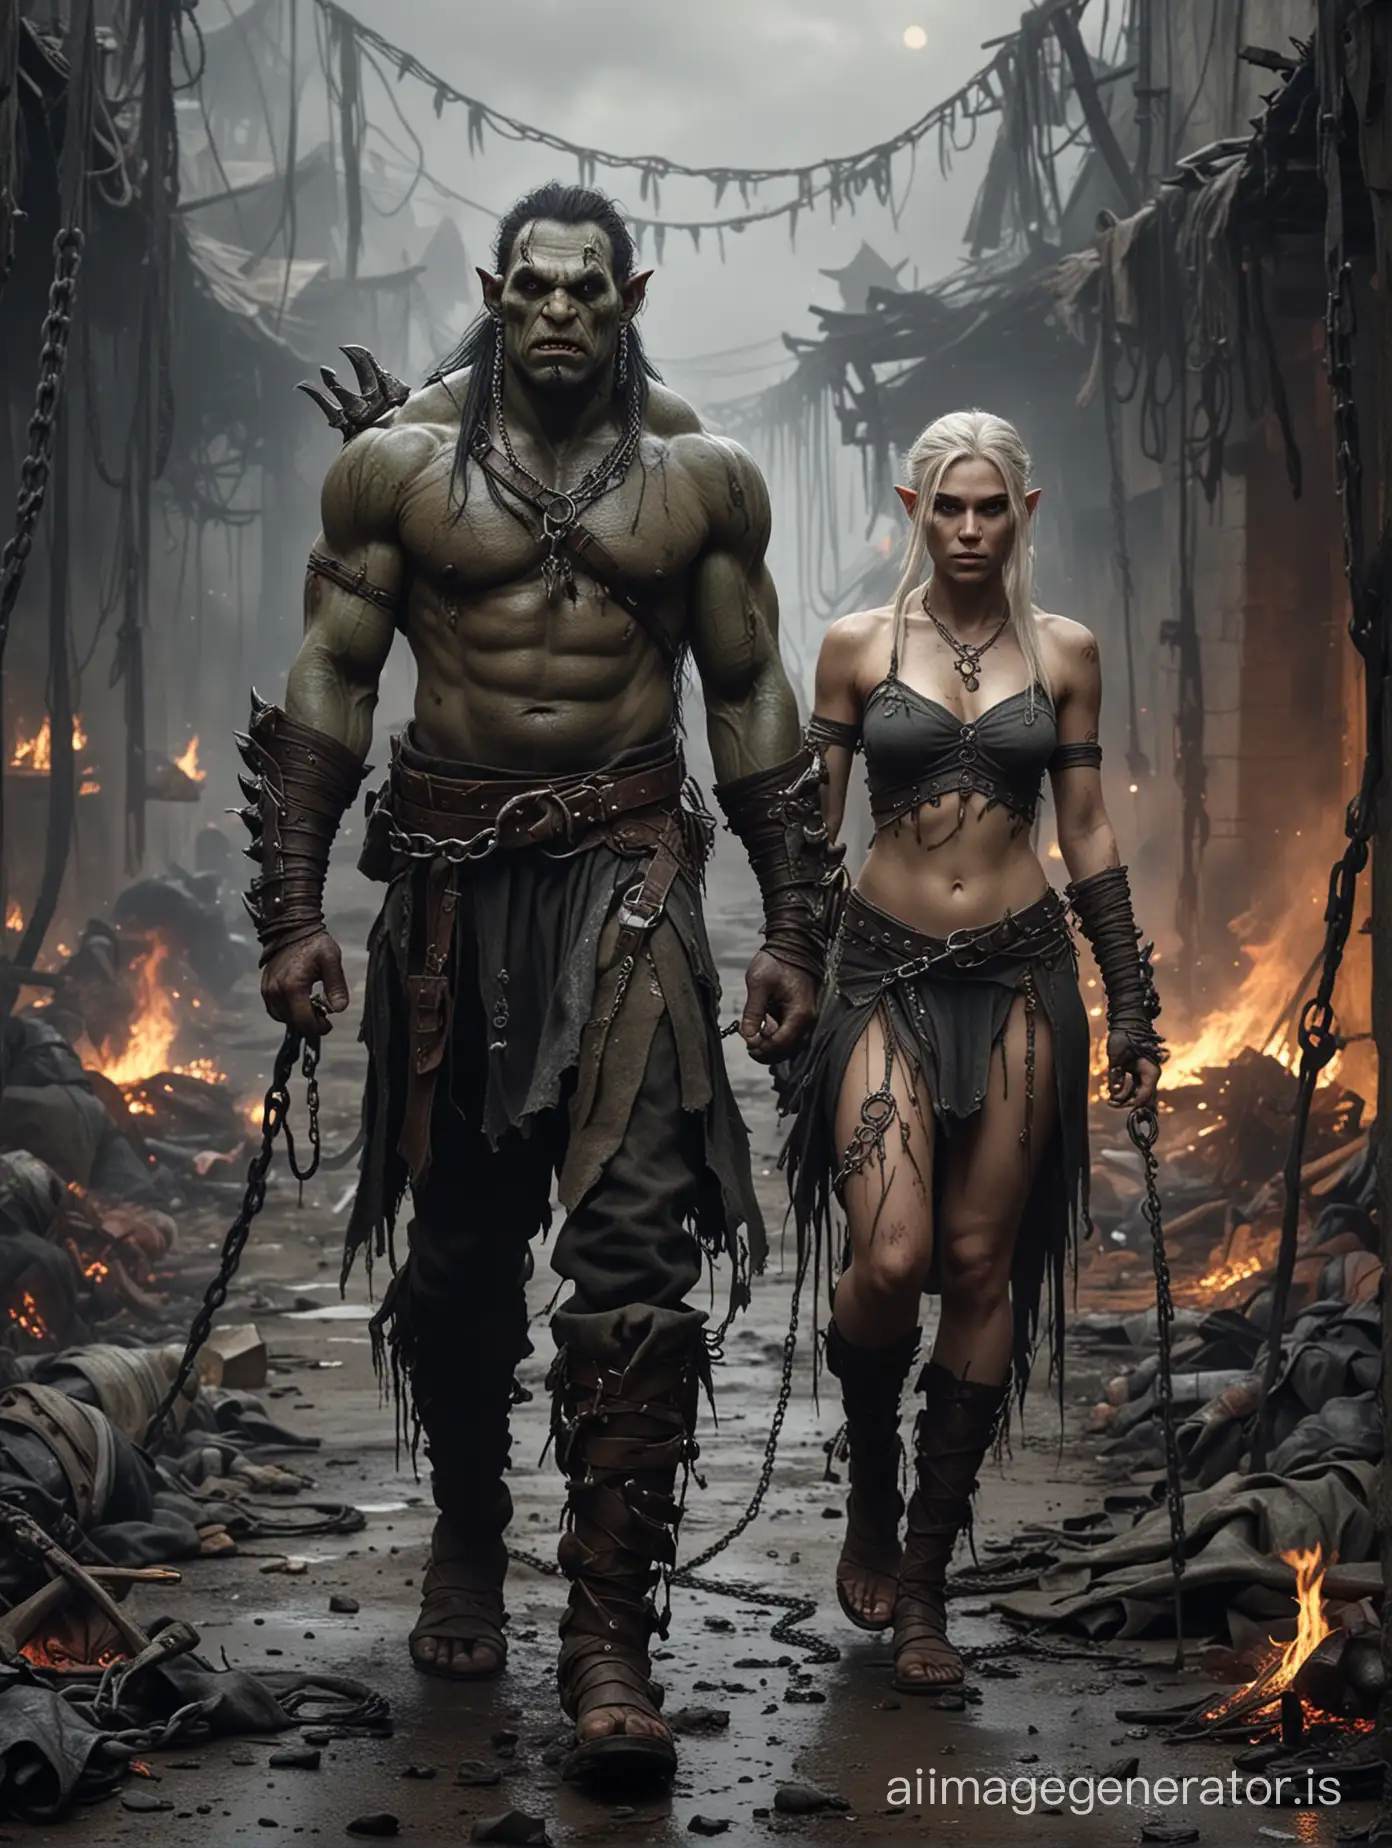 The Orc Leader in his harness with his female elven slave in chains walking next to him. Slave in tattered rags next to him, in the middle of the orc tribe. Dark and gloomy, fires burn, the orcs feast